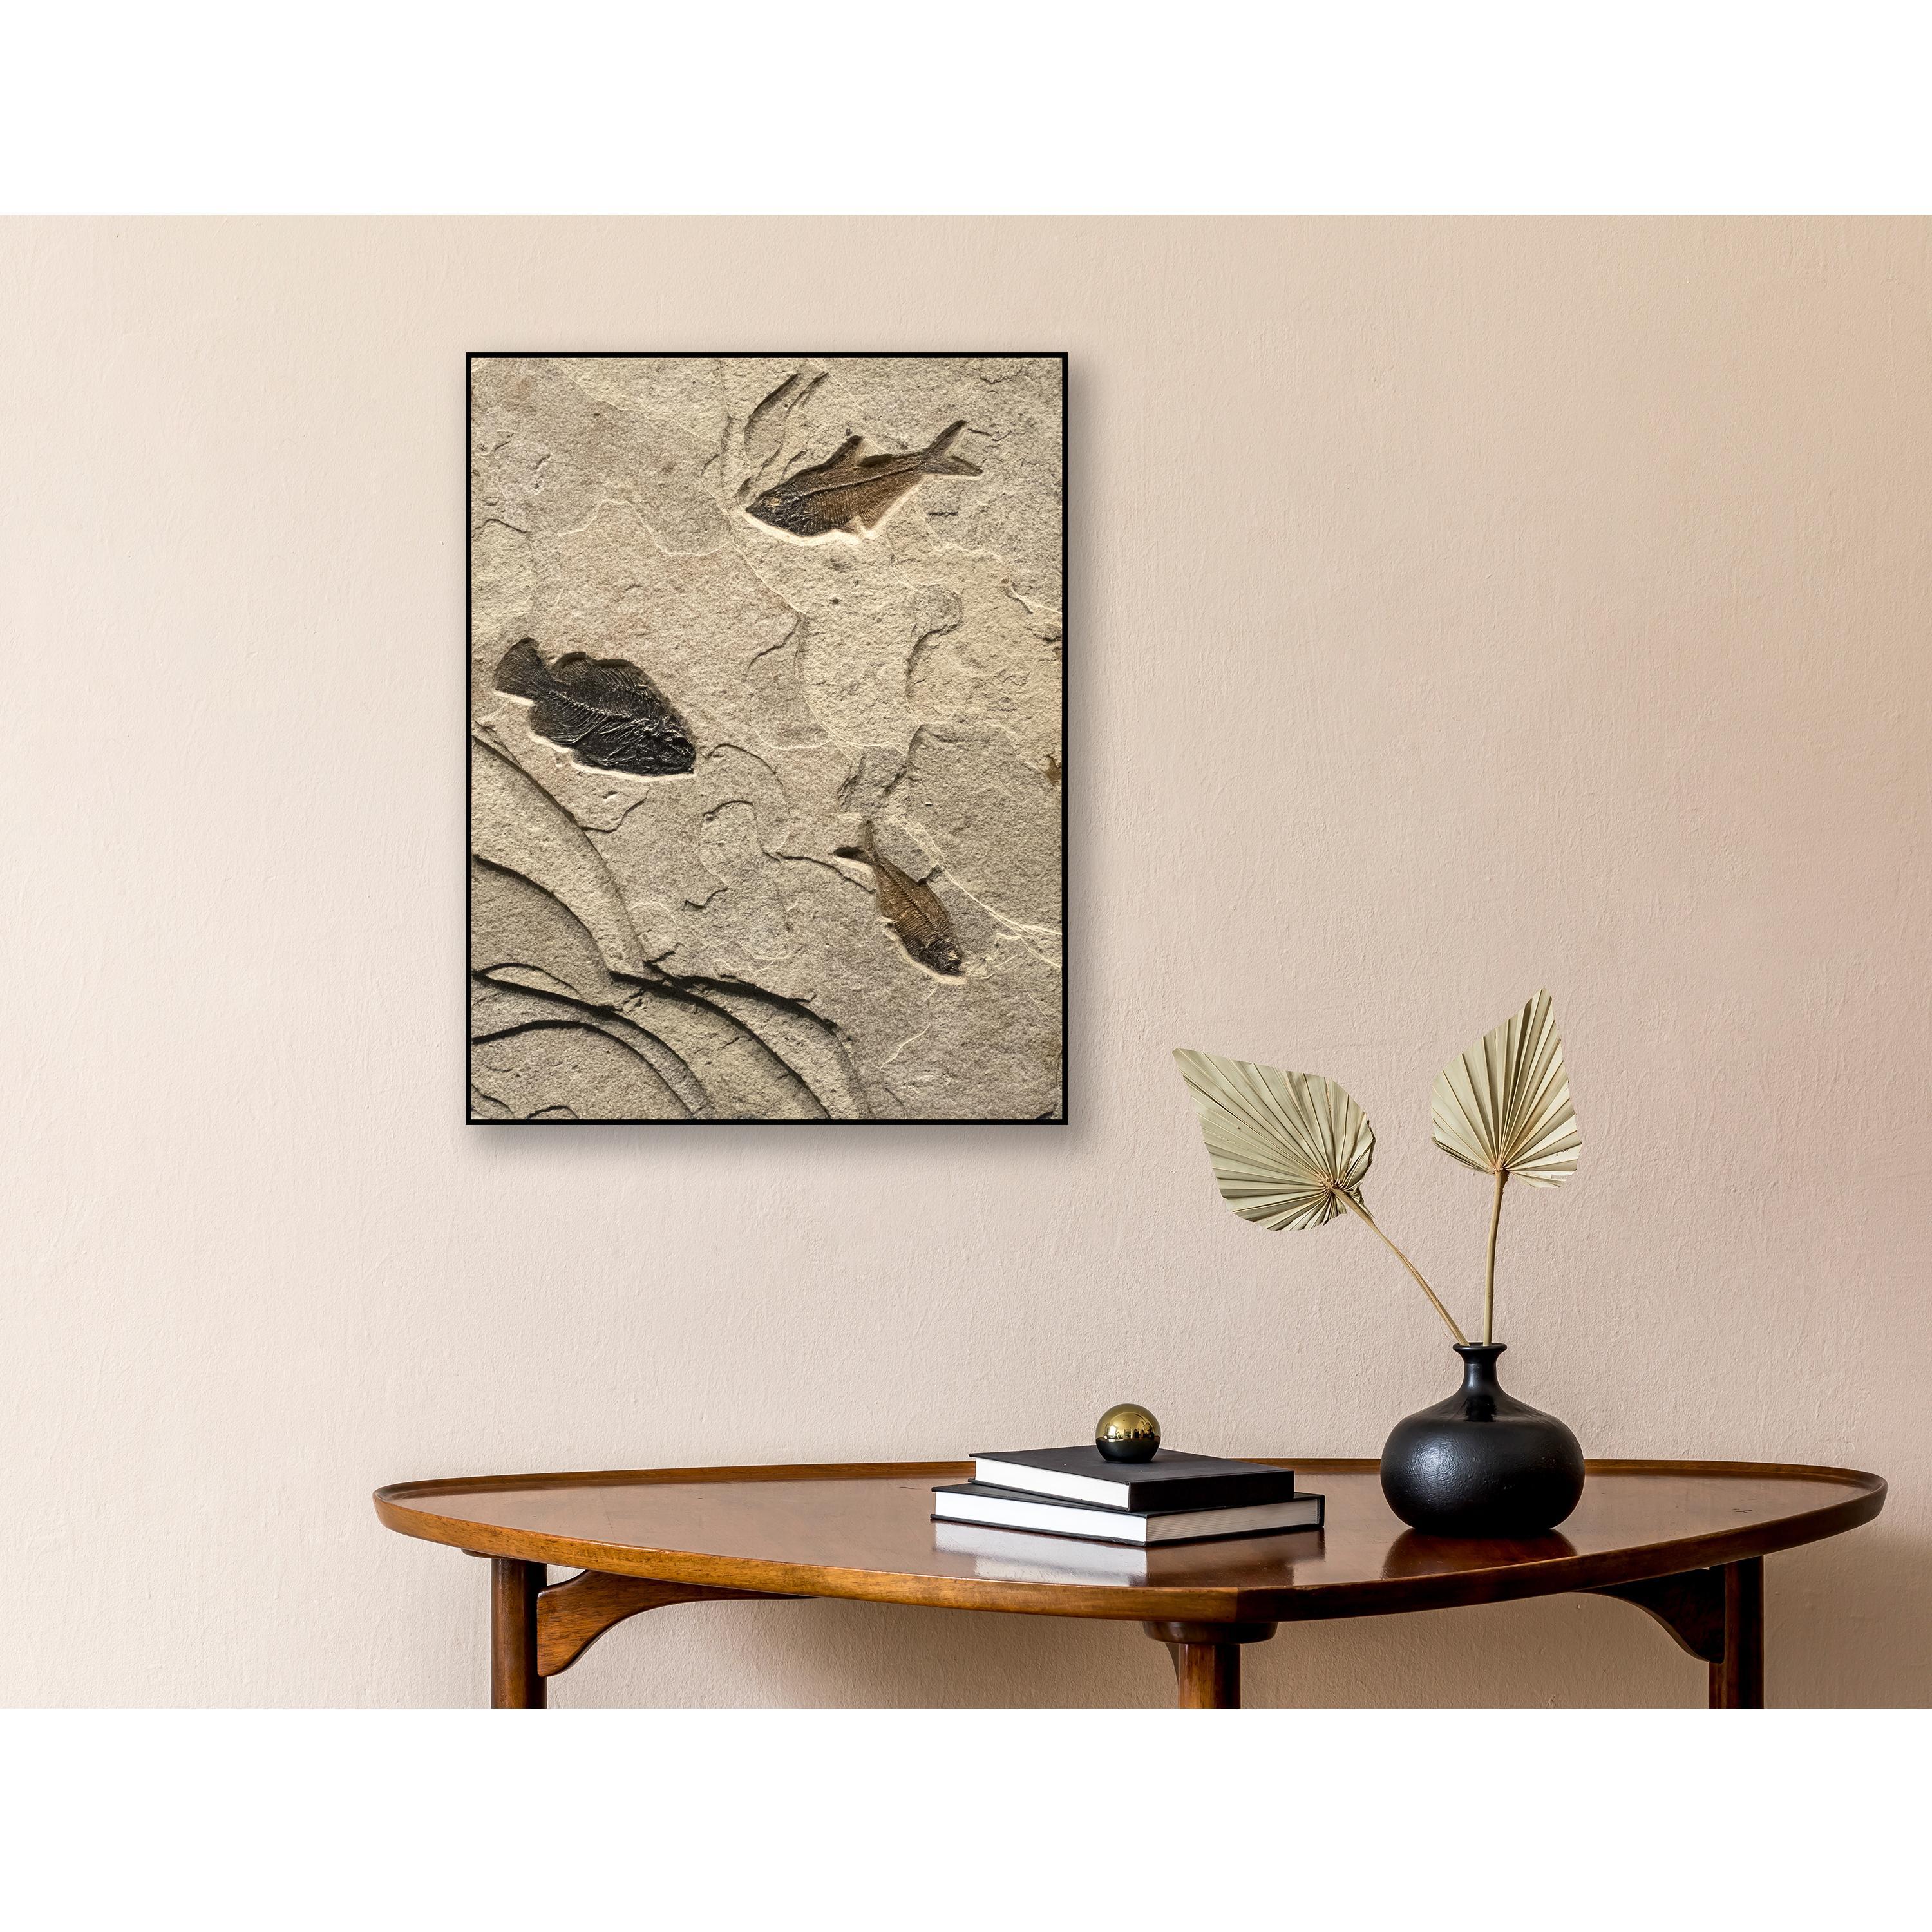 This exquisite fossil mural features a Cockerellites liops (formerly known as Priscacara) and two Diplomystus dentatus, all of which are Eocene era fossils dating back about 50 million years. These ancient fish are forever preserved in a textured